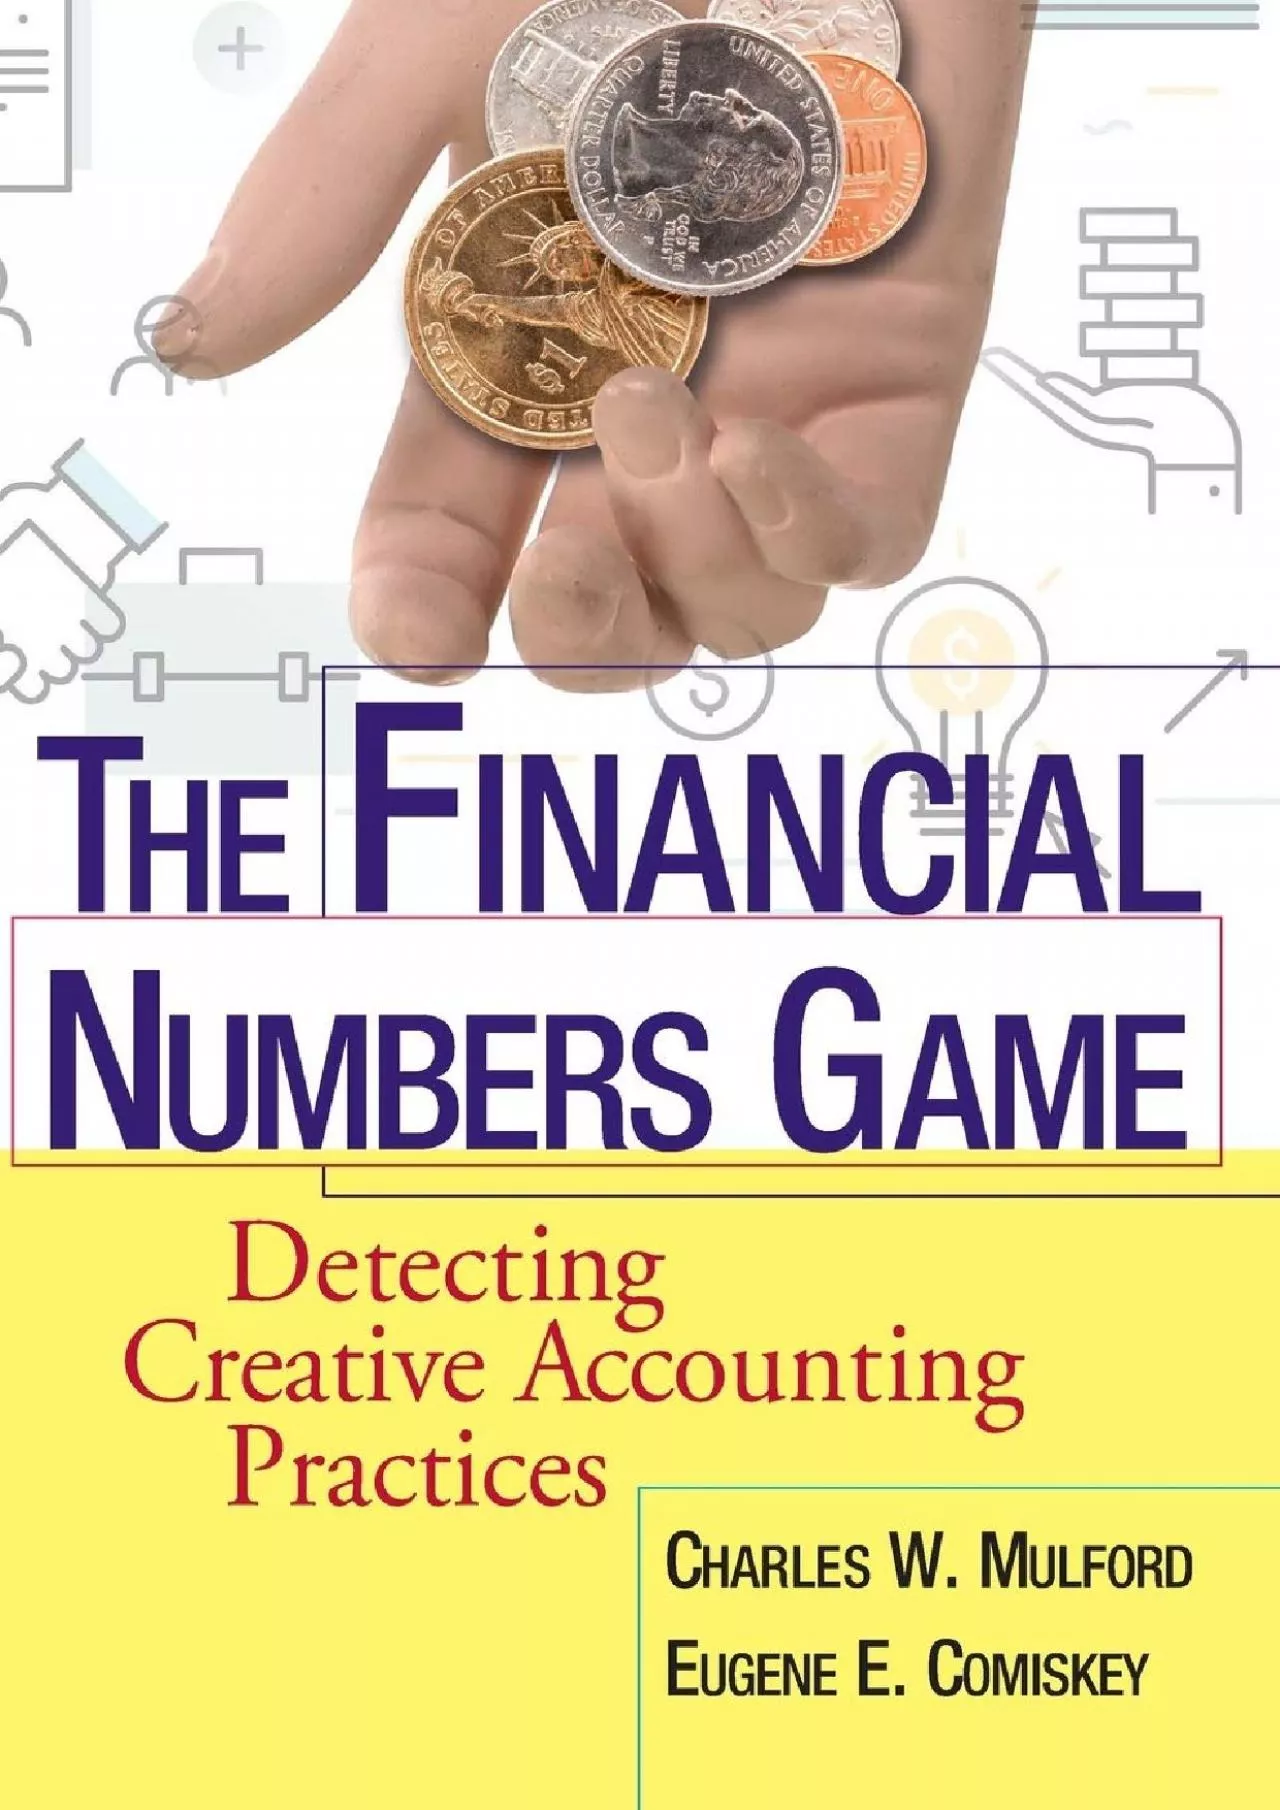 (DOWNLOAD)-The Financial Numbers Game: Detecting Creative Accounting Practices